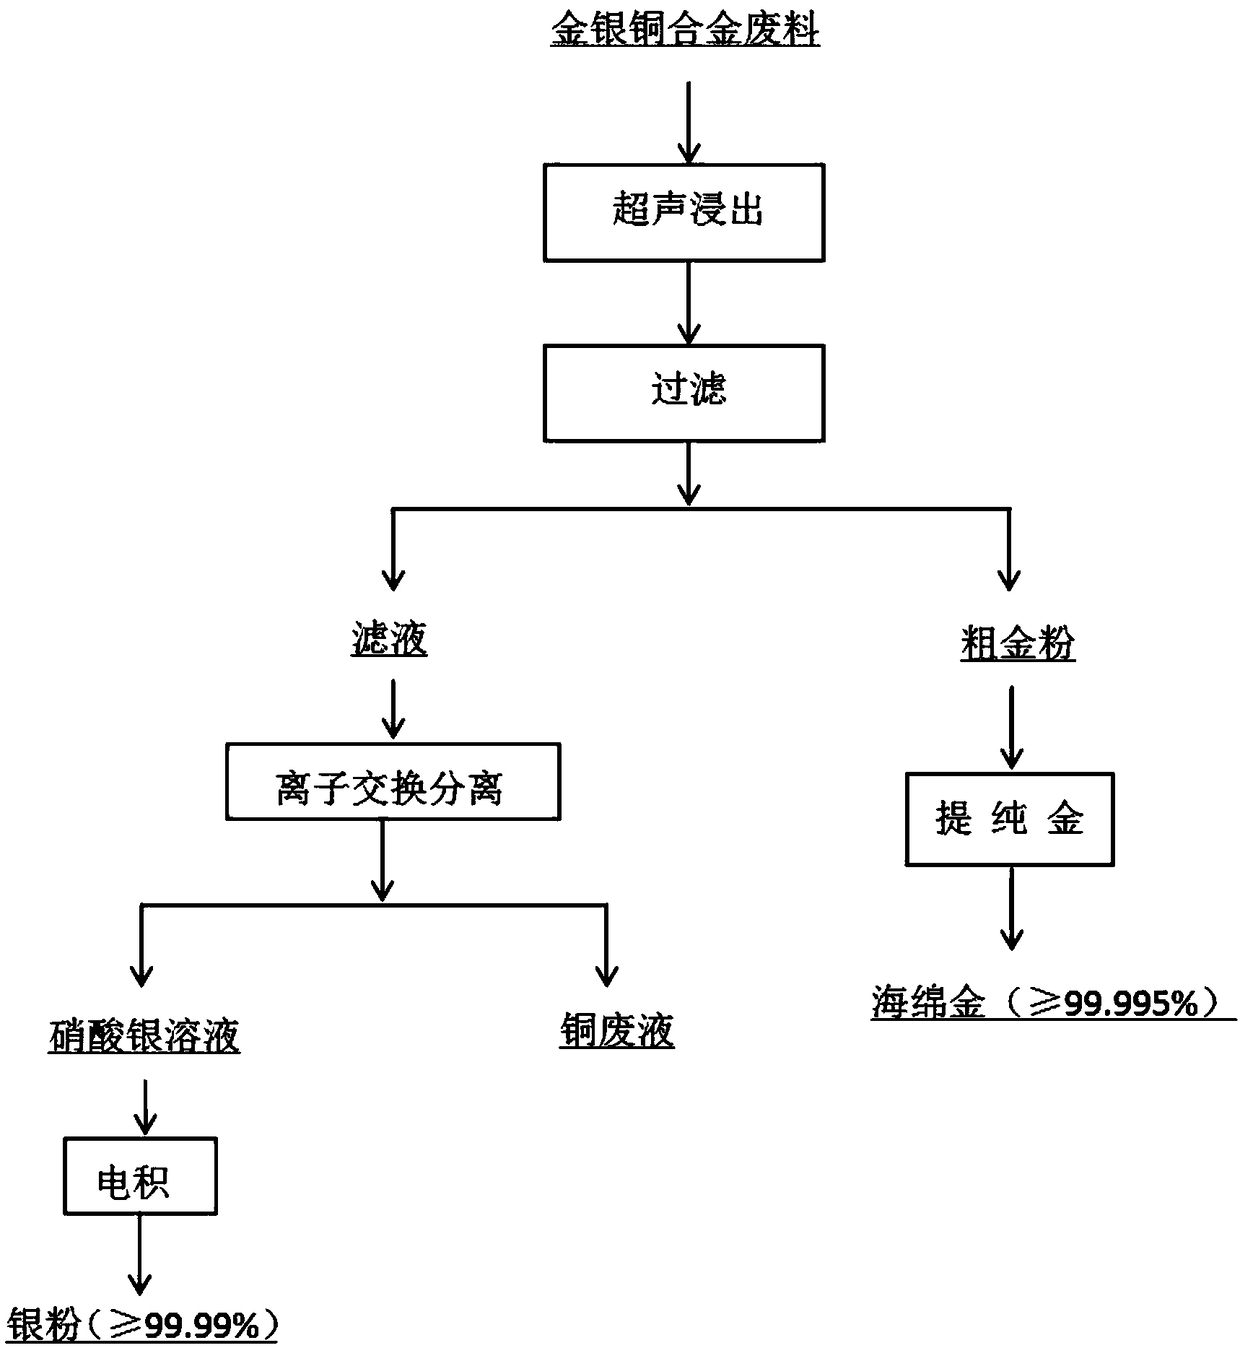 Method for recovering gold and silver in gold, silver and copper alloy scrap